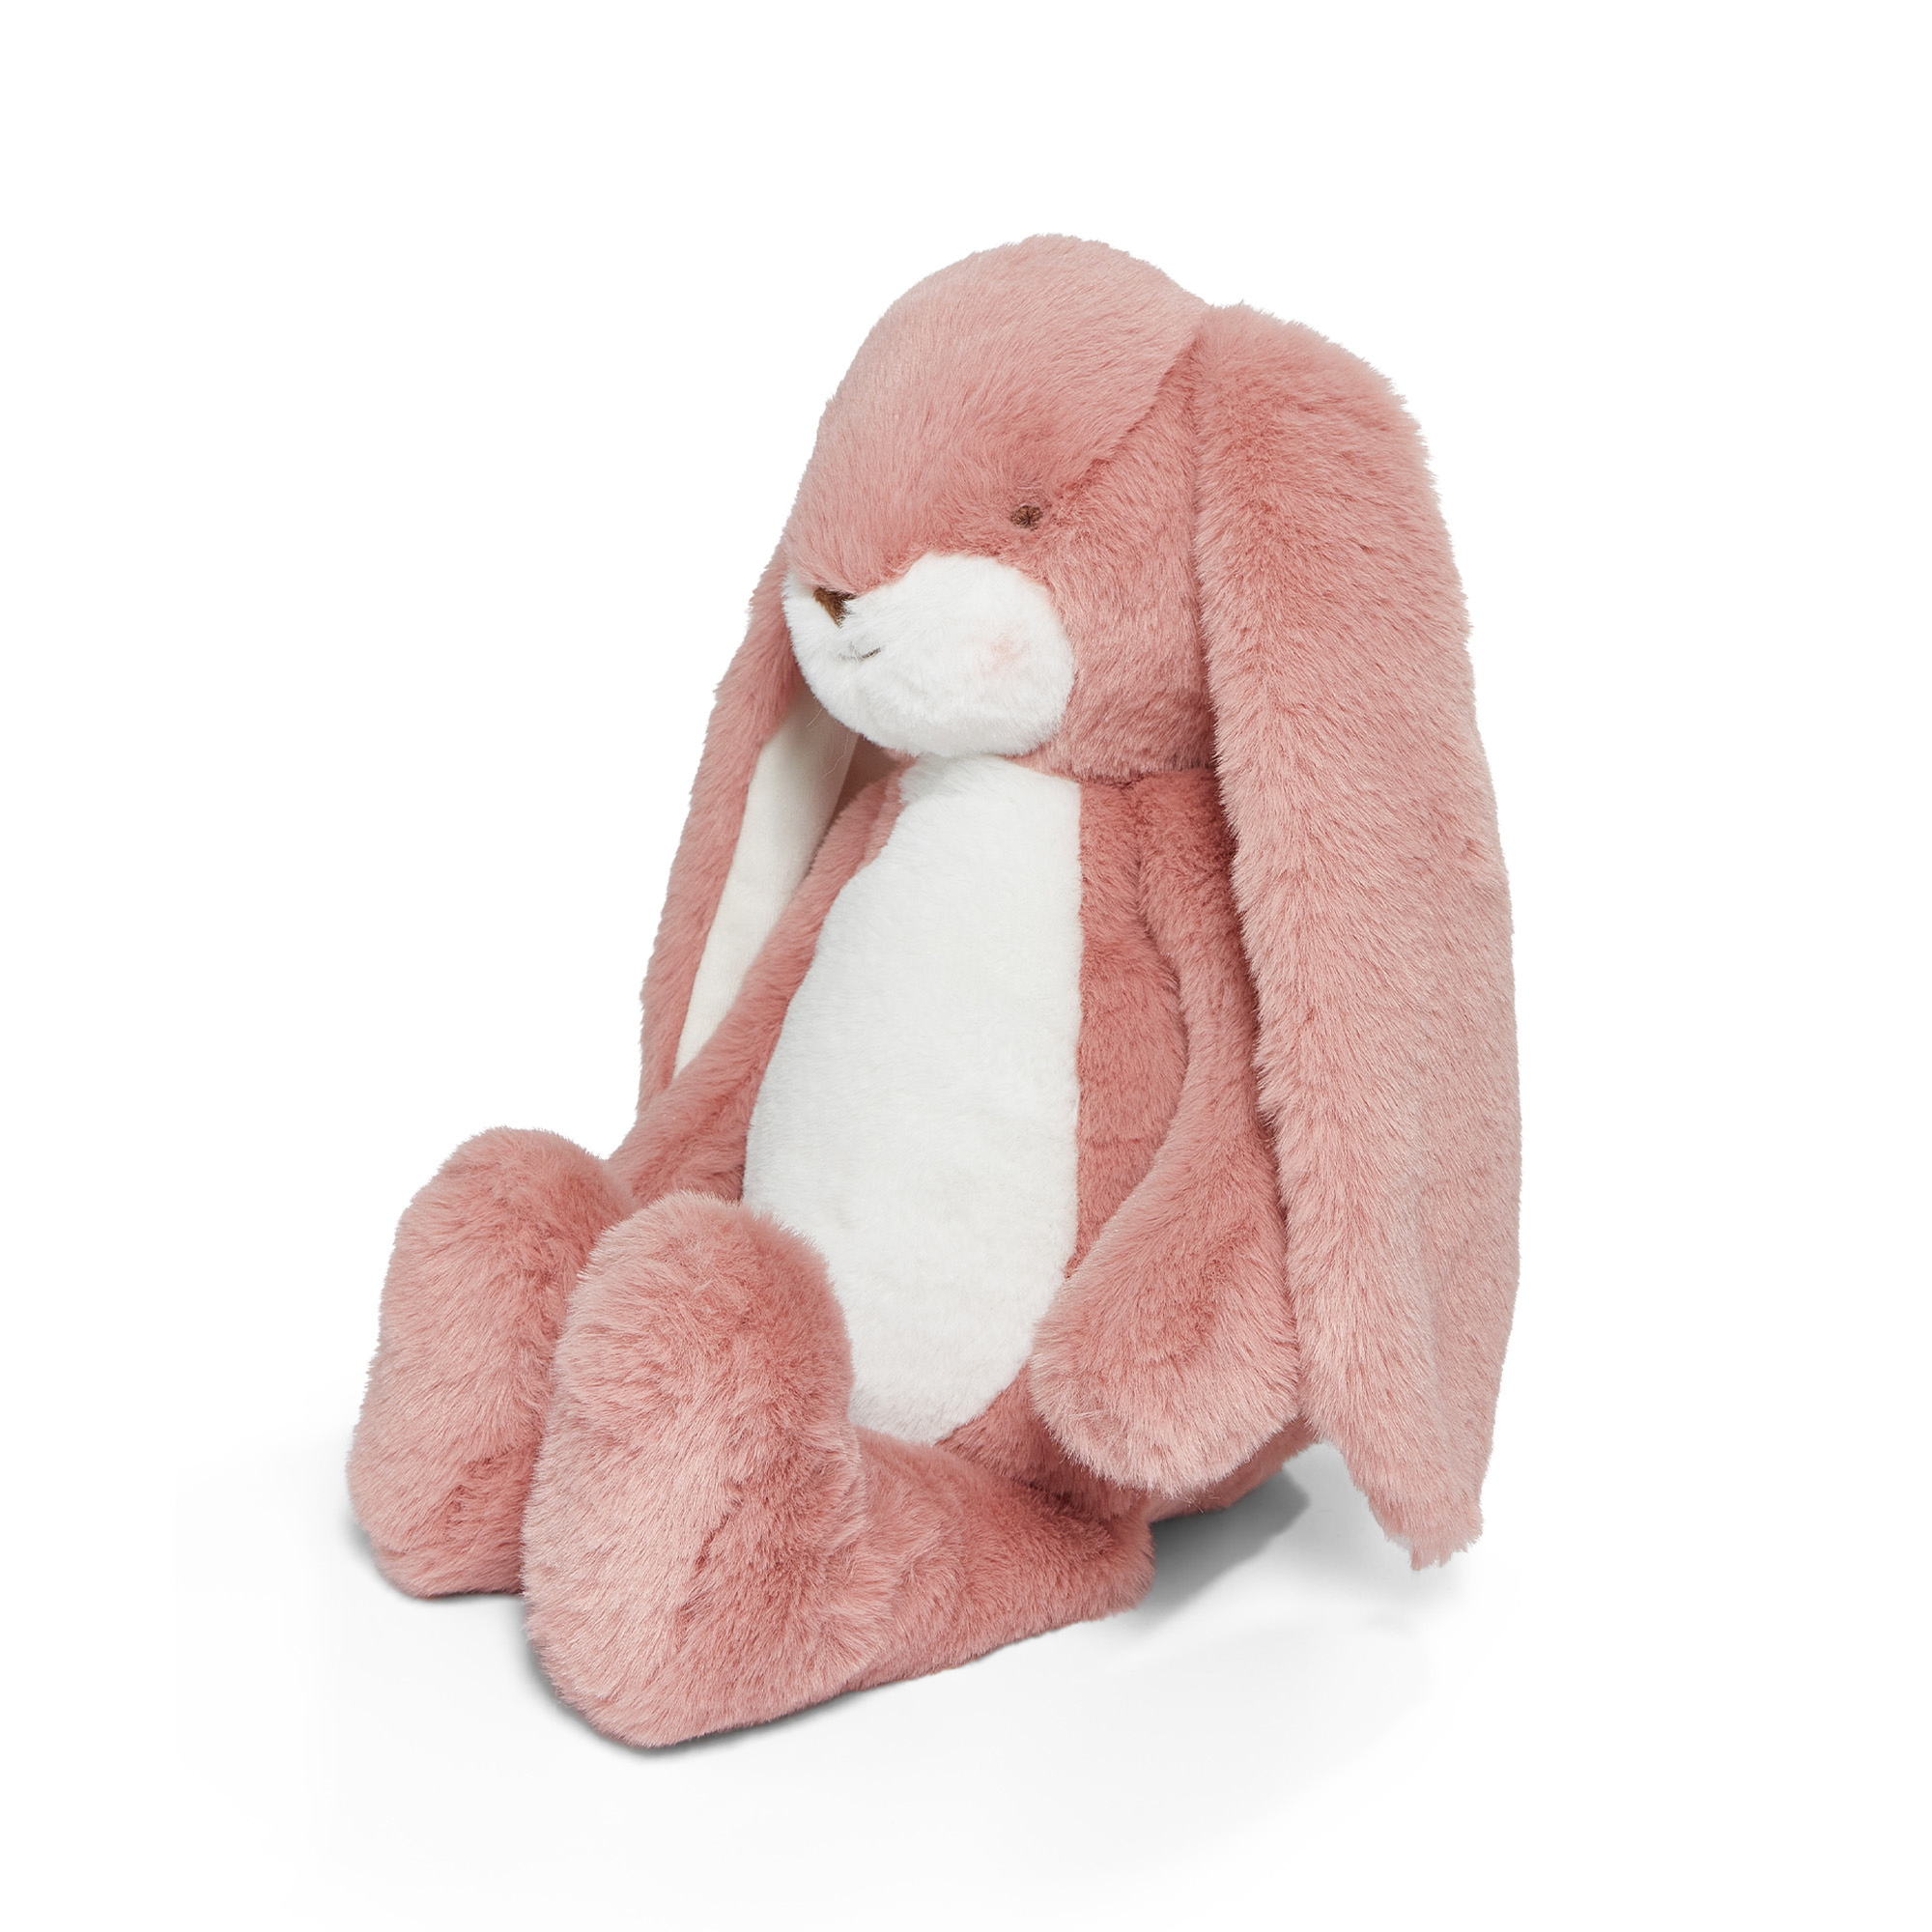 Peluche floppy sweet nibble coral blush 40 cm - Bunnies By The Bay